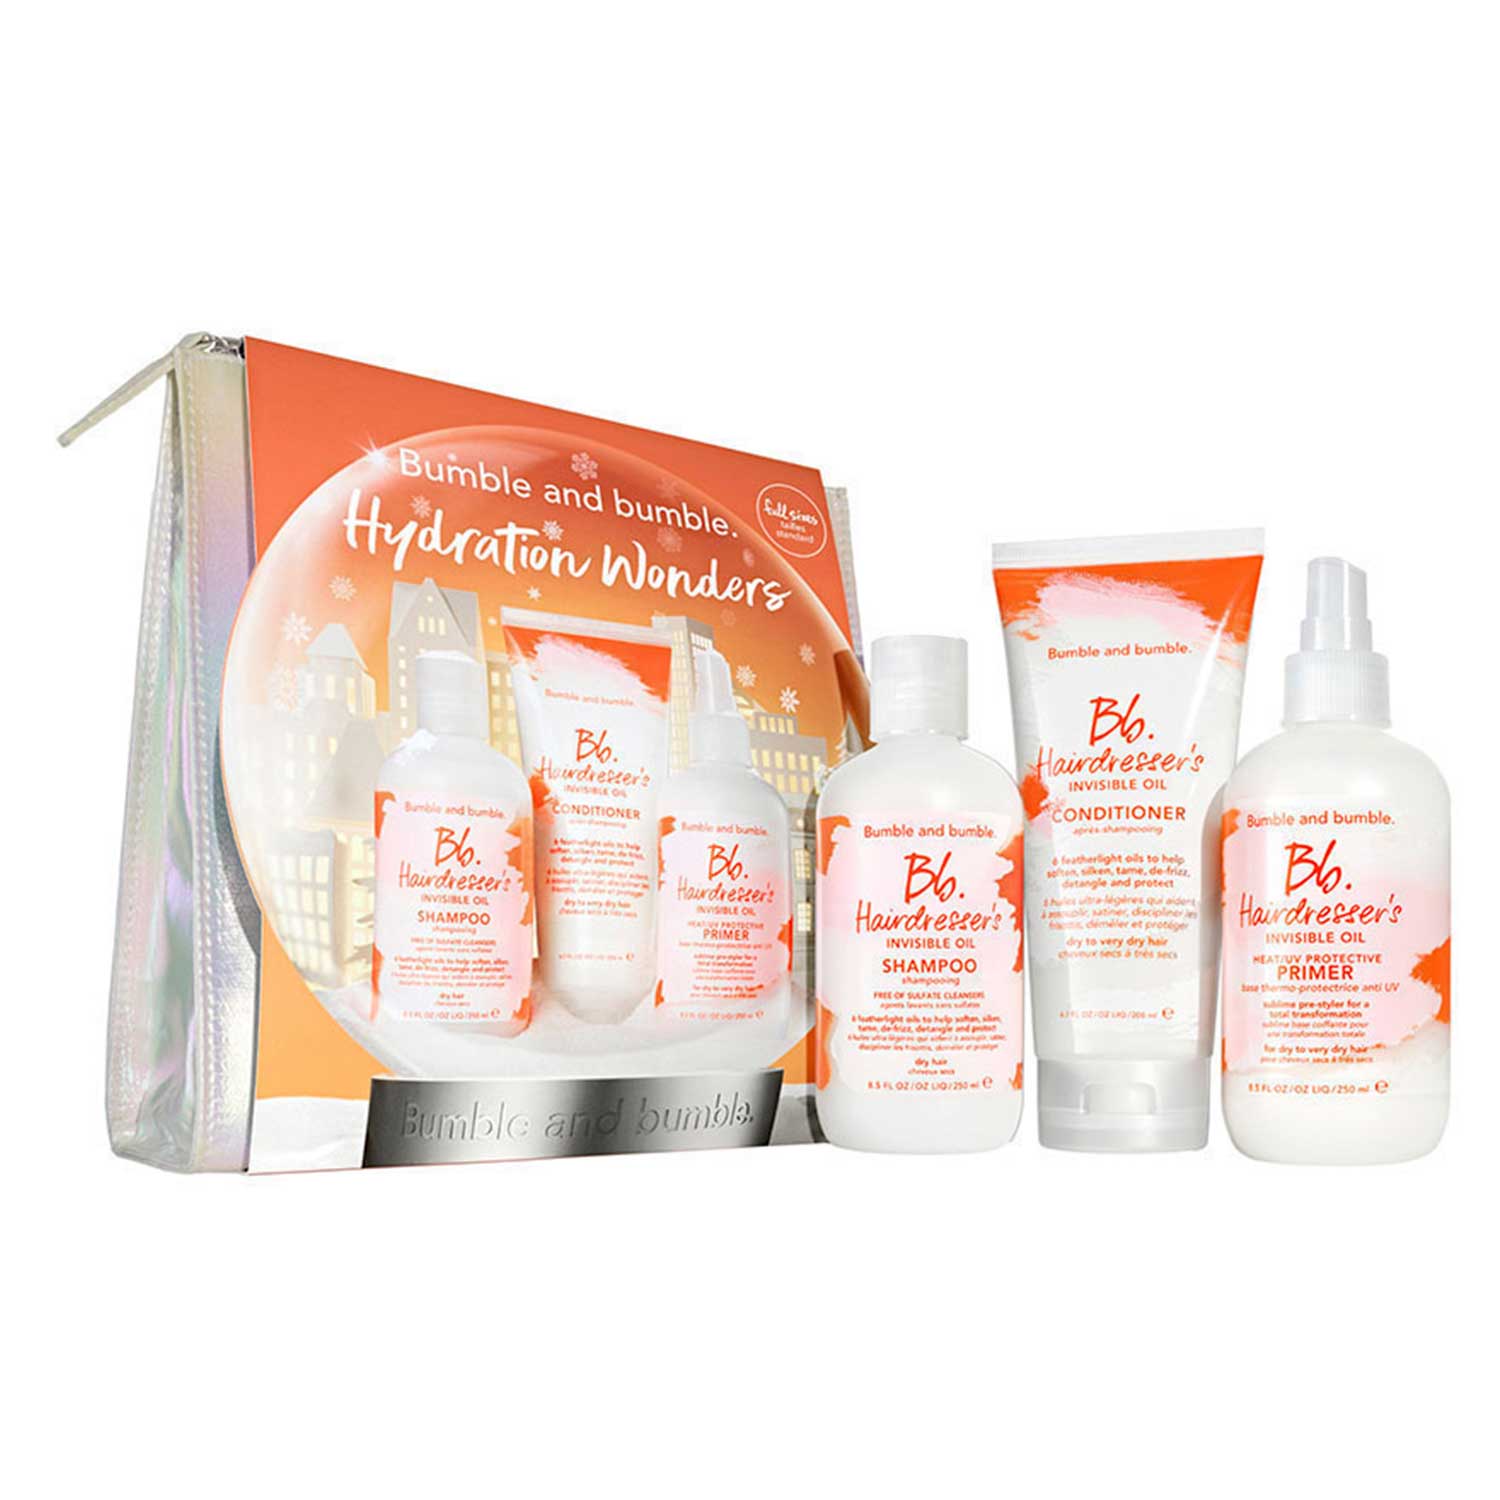 HAIRDRESSER'S INVISIBLE OIL HOLIDAY SET (SET DE TRATAMIENTO ANTI-FRIZZ)